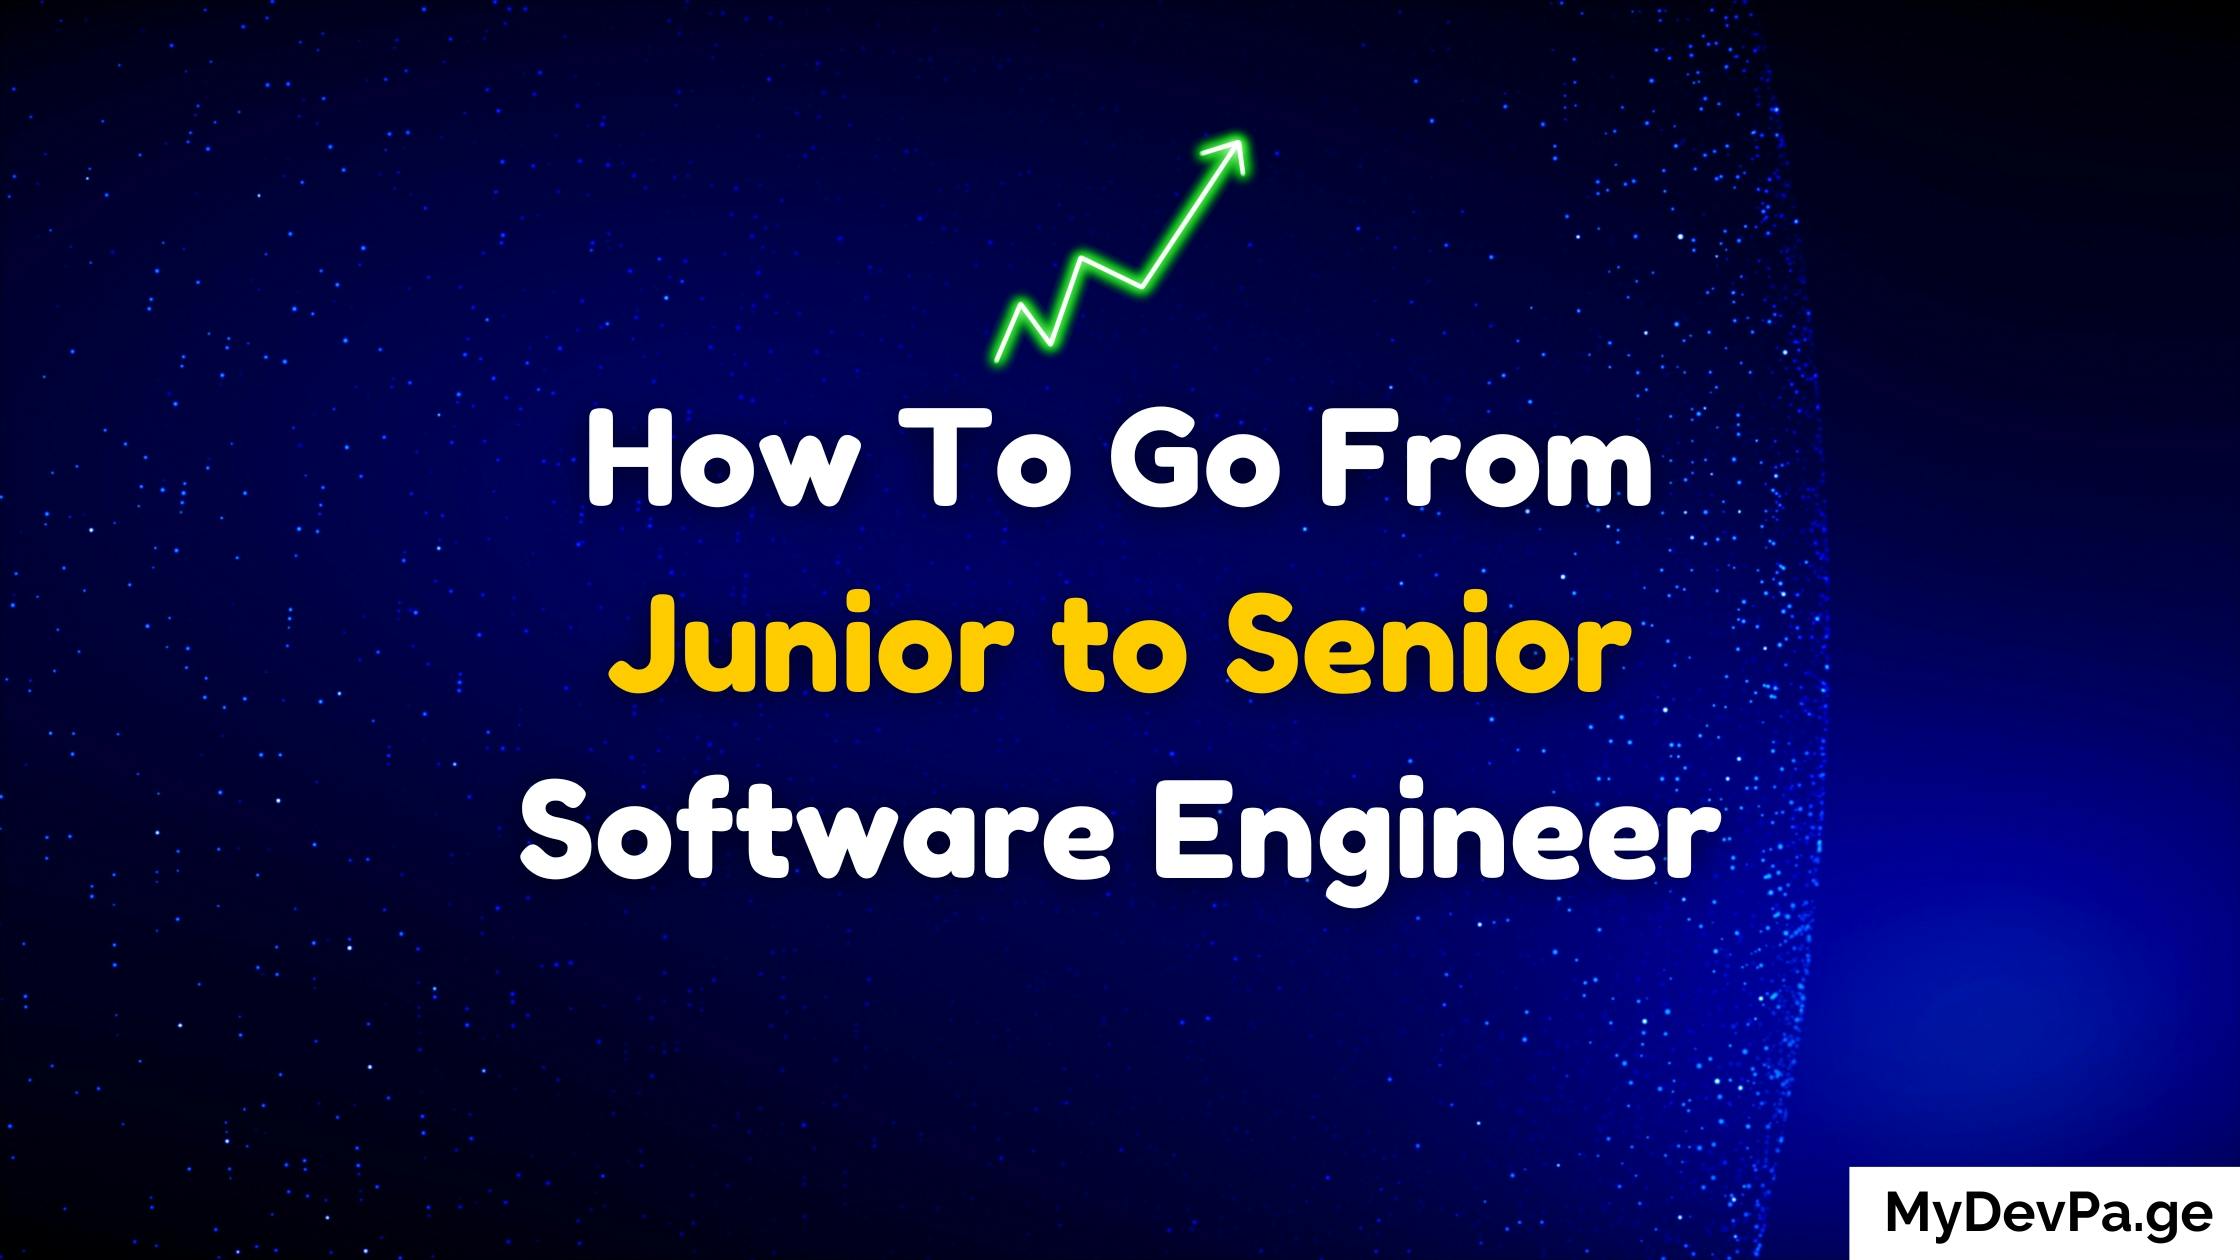 5 Traits of a Senior Software Engineer to Level Up As a Junior Software Engineer